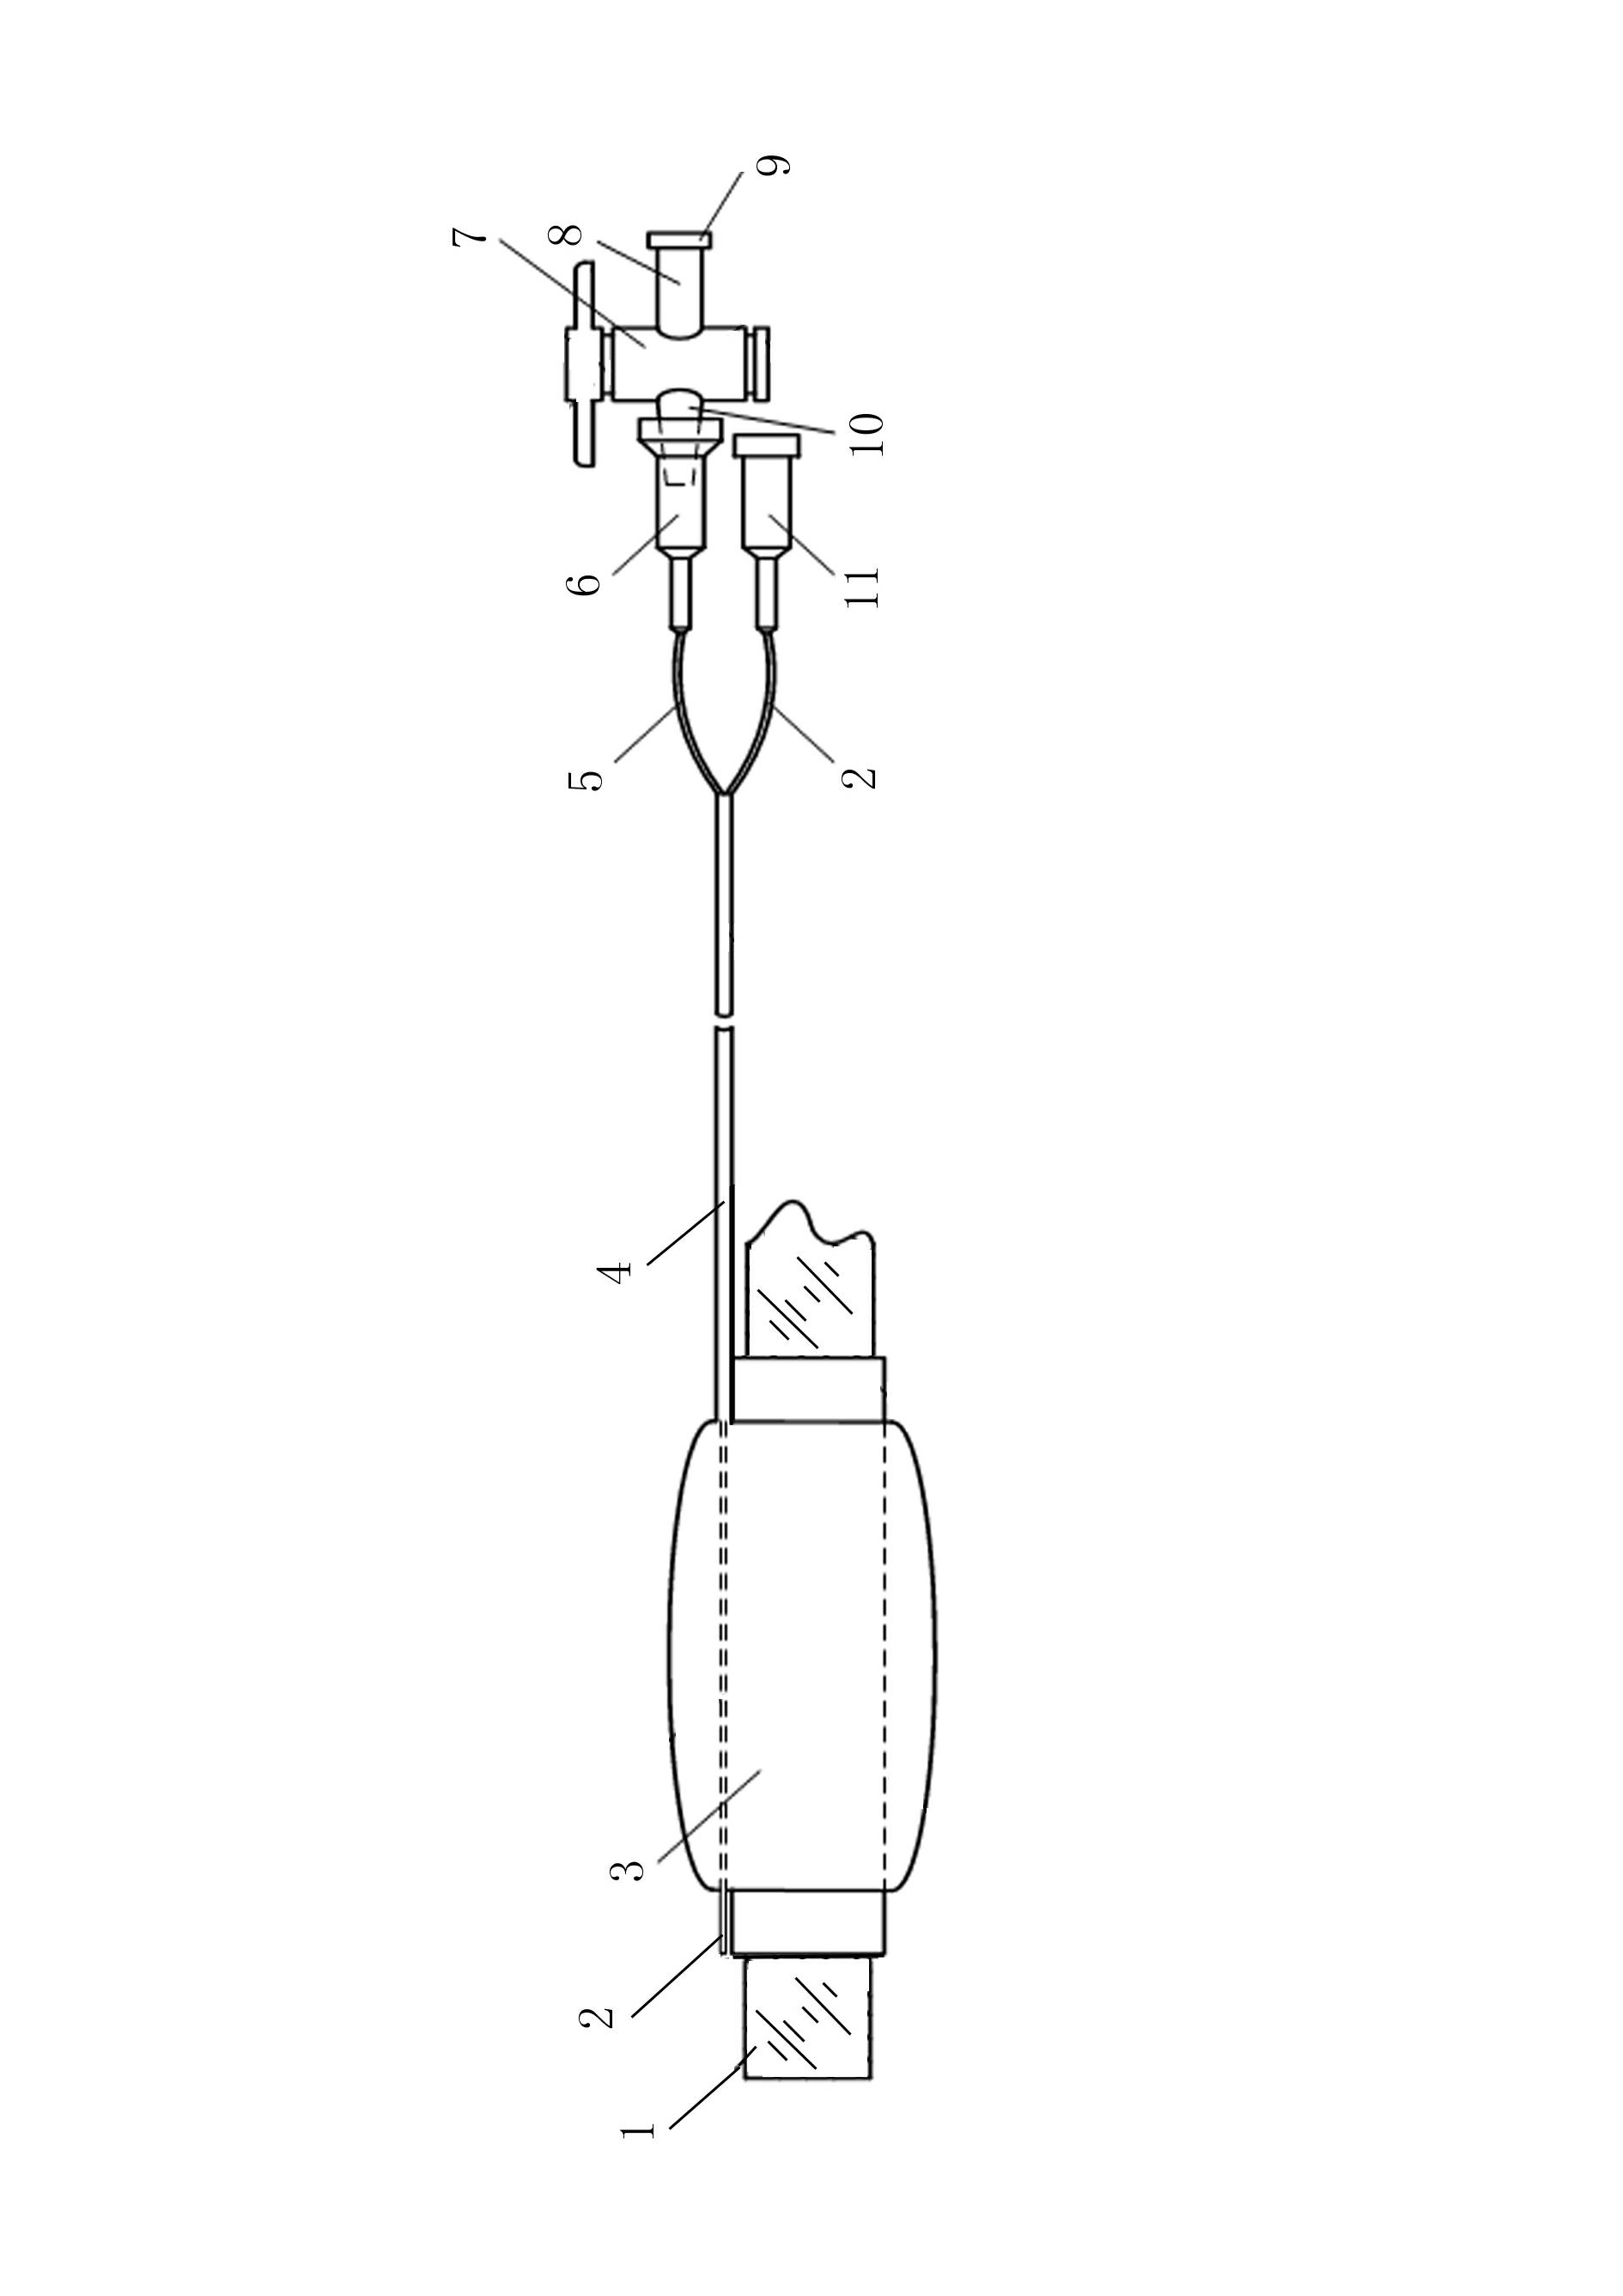 Endoscopic outer sleeve airbag with double hoses